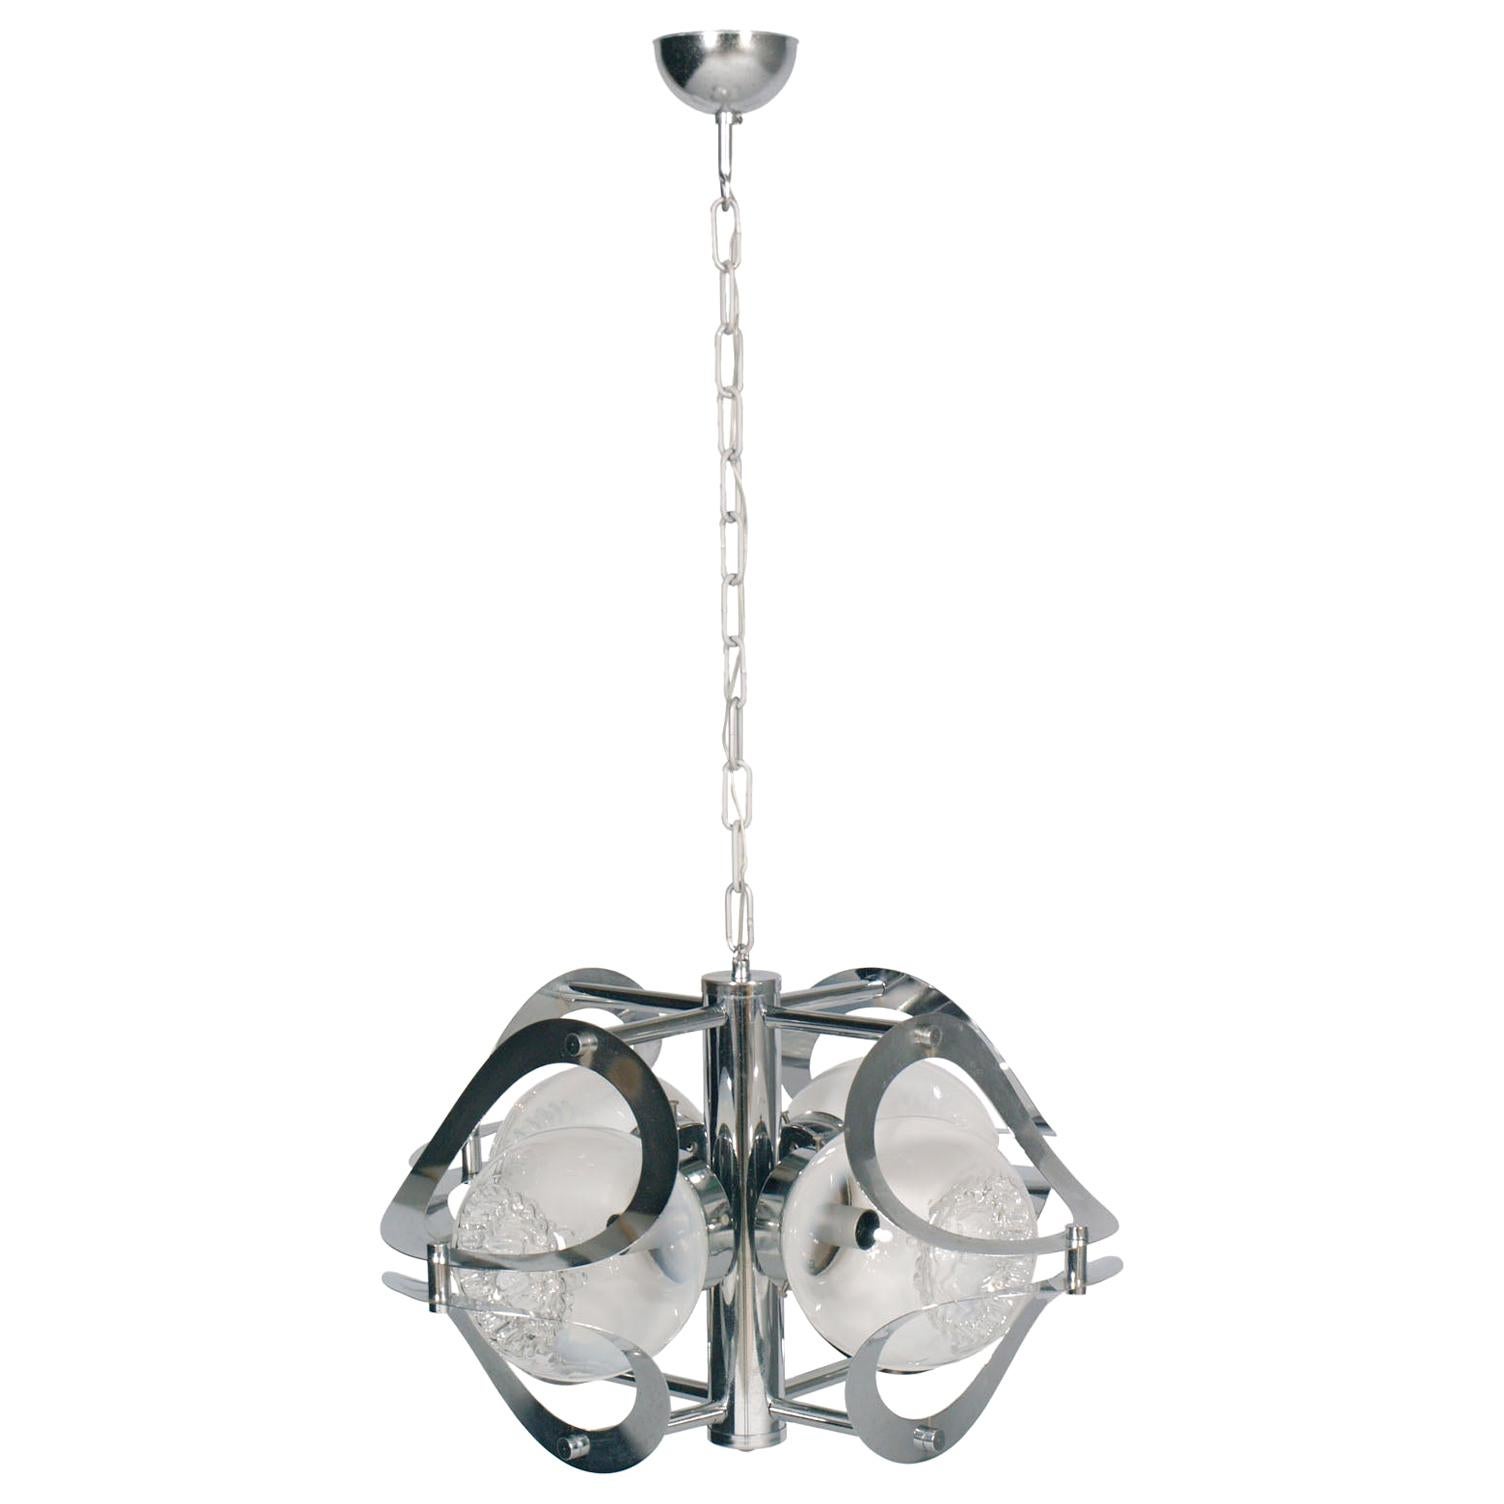 Space Age Mazzega Chandelier in Chromed Steel and Murano Glass, 4-Light For Sale